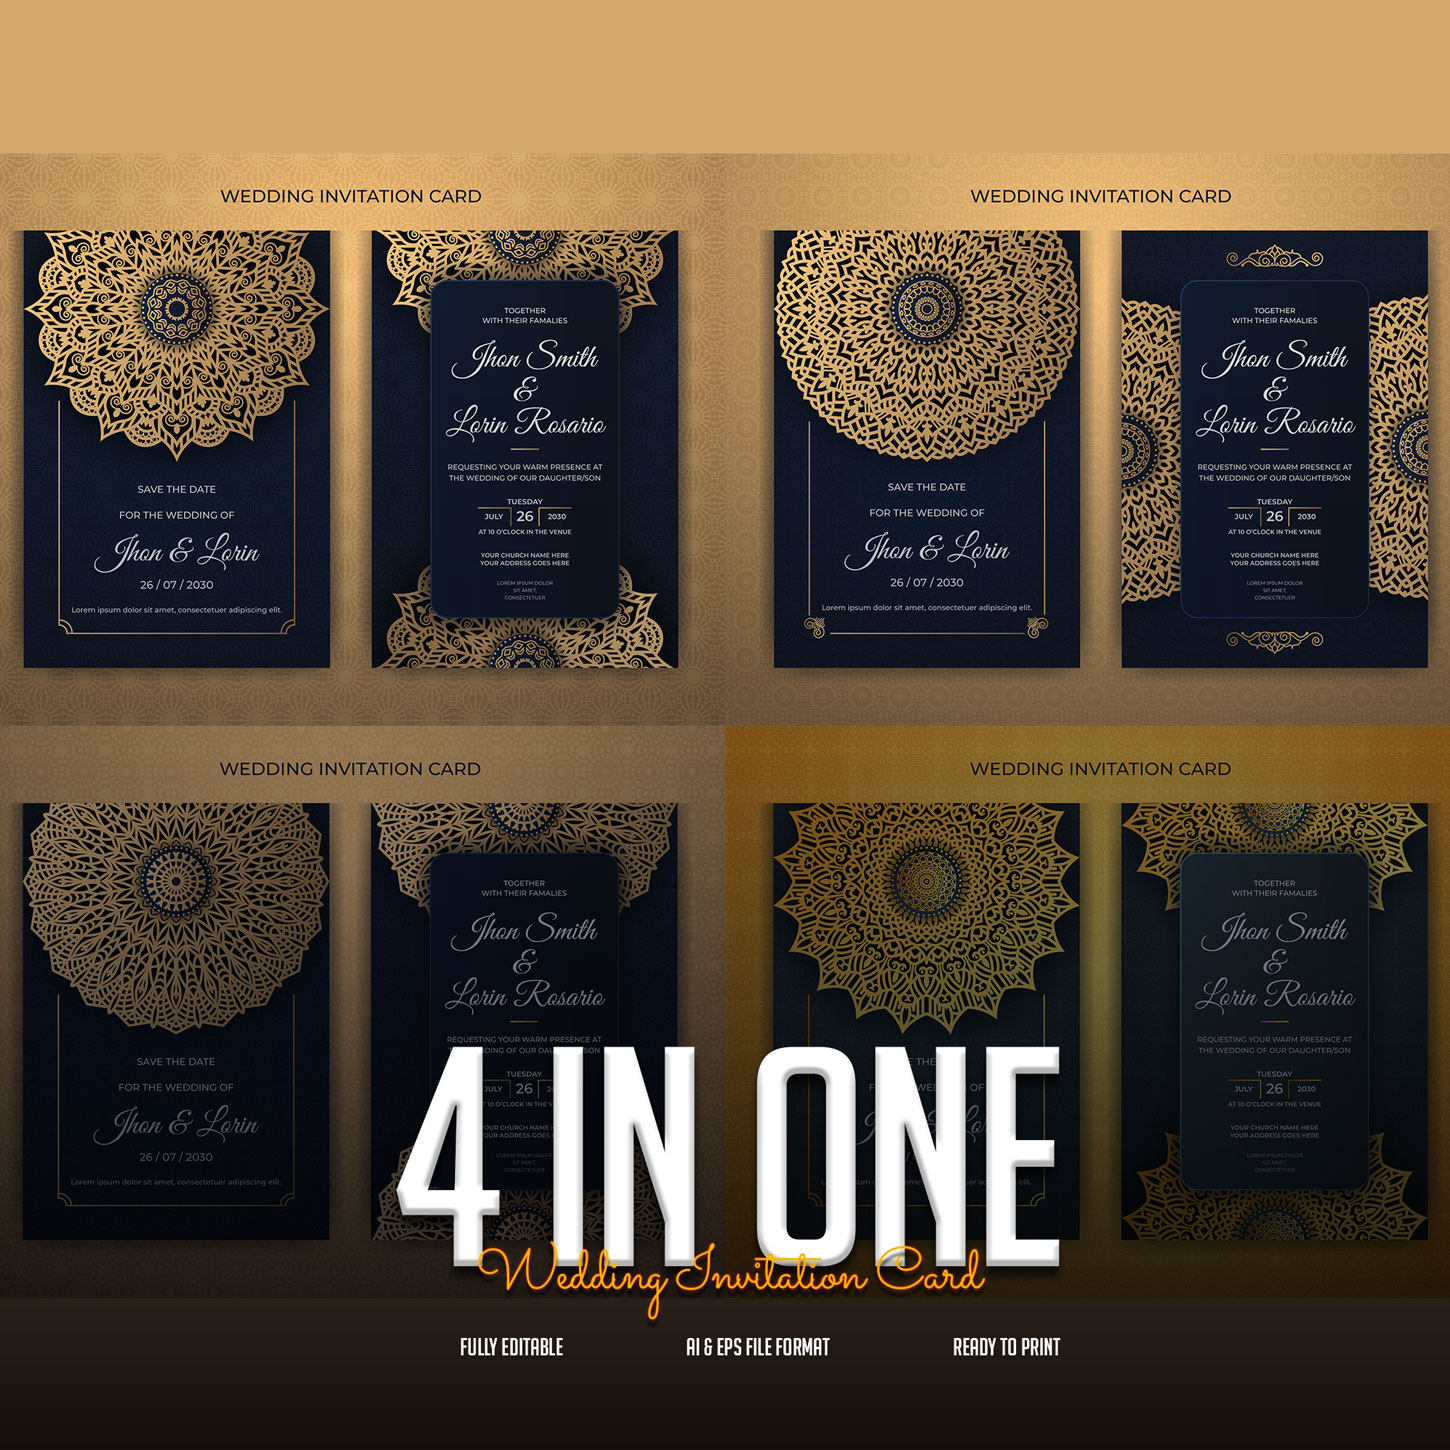 4 In One Luxury Wedding Invitation Card Design Only In $7 cover image.